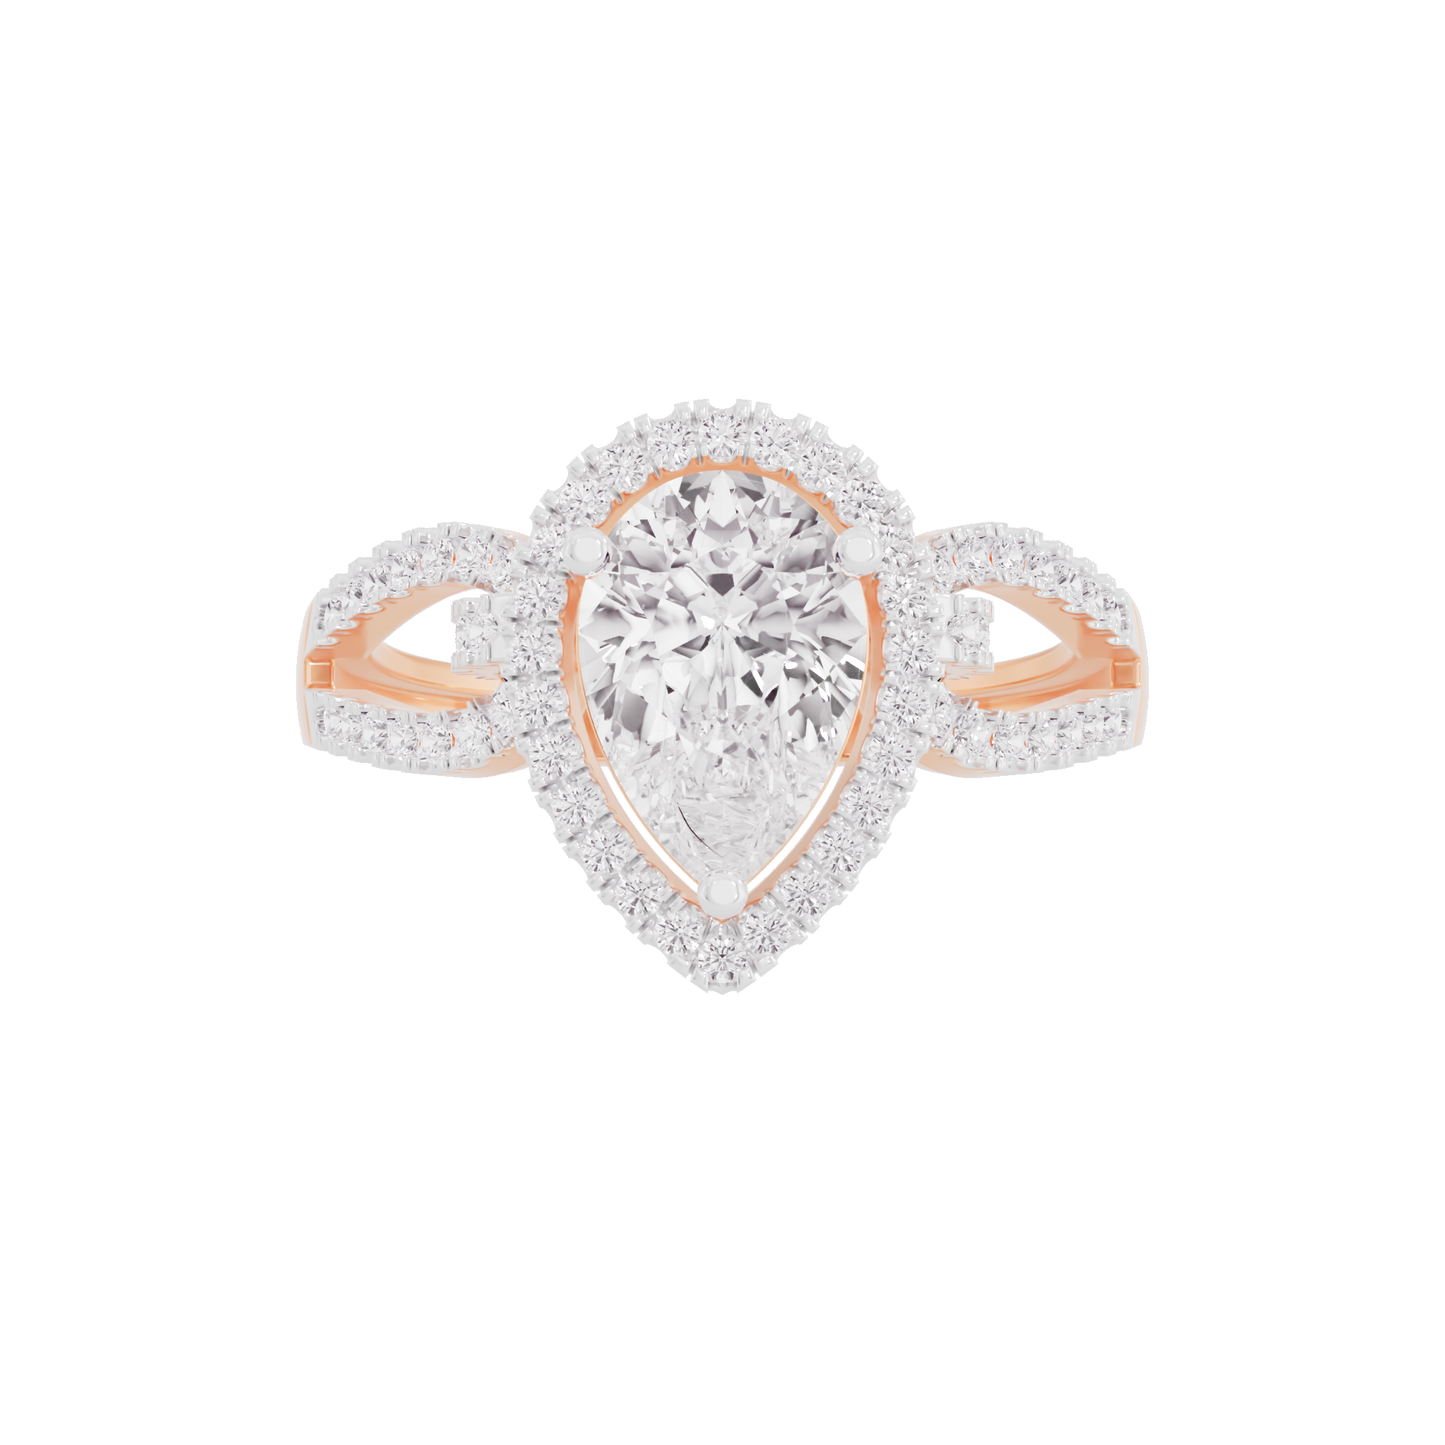 Exquisite Melody Diamond Ring